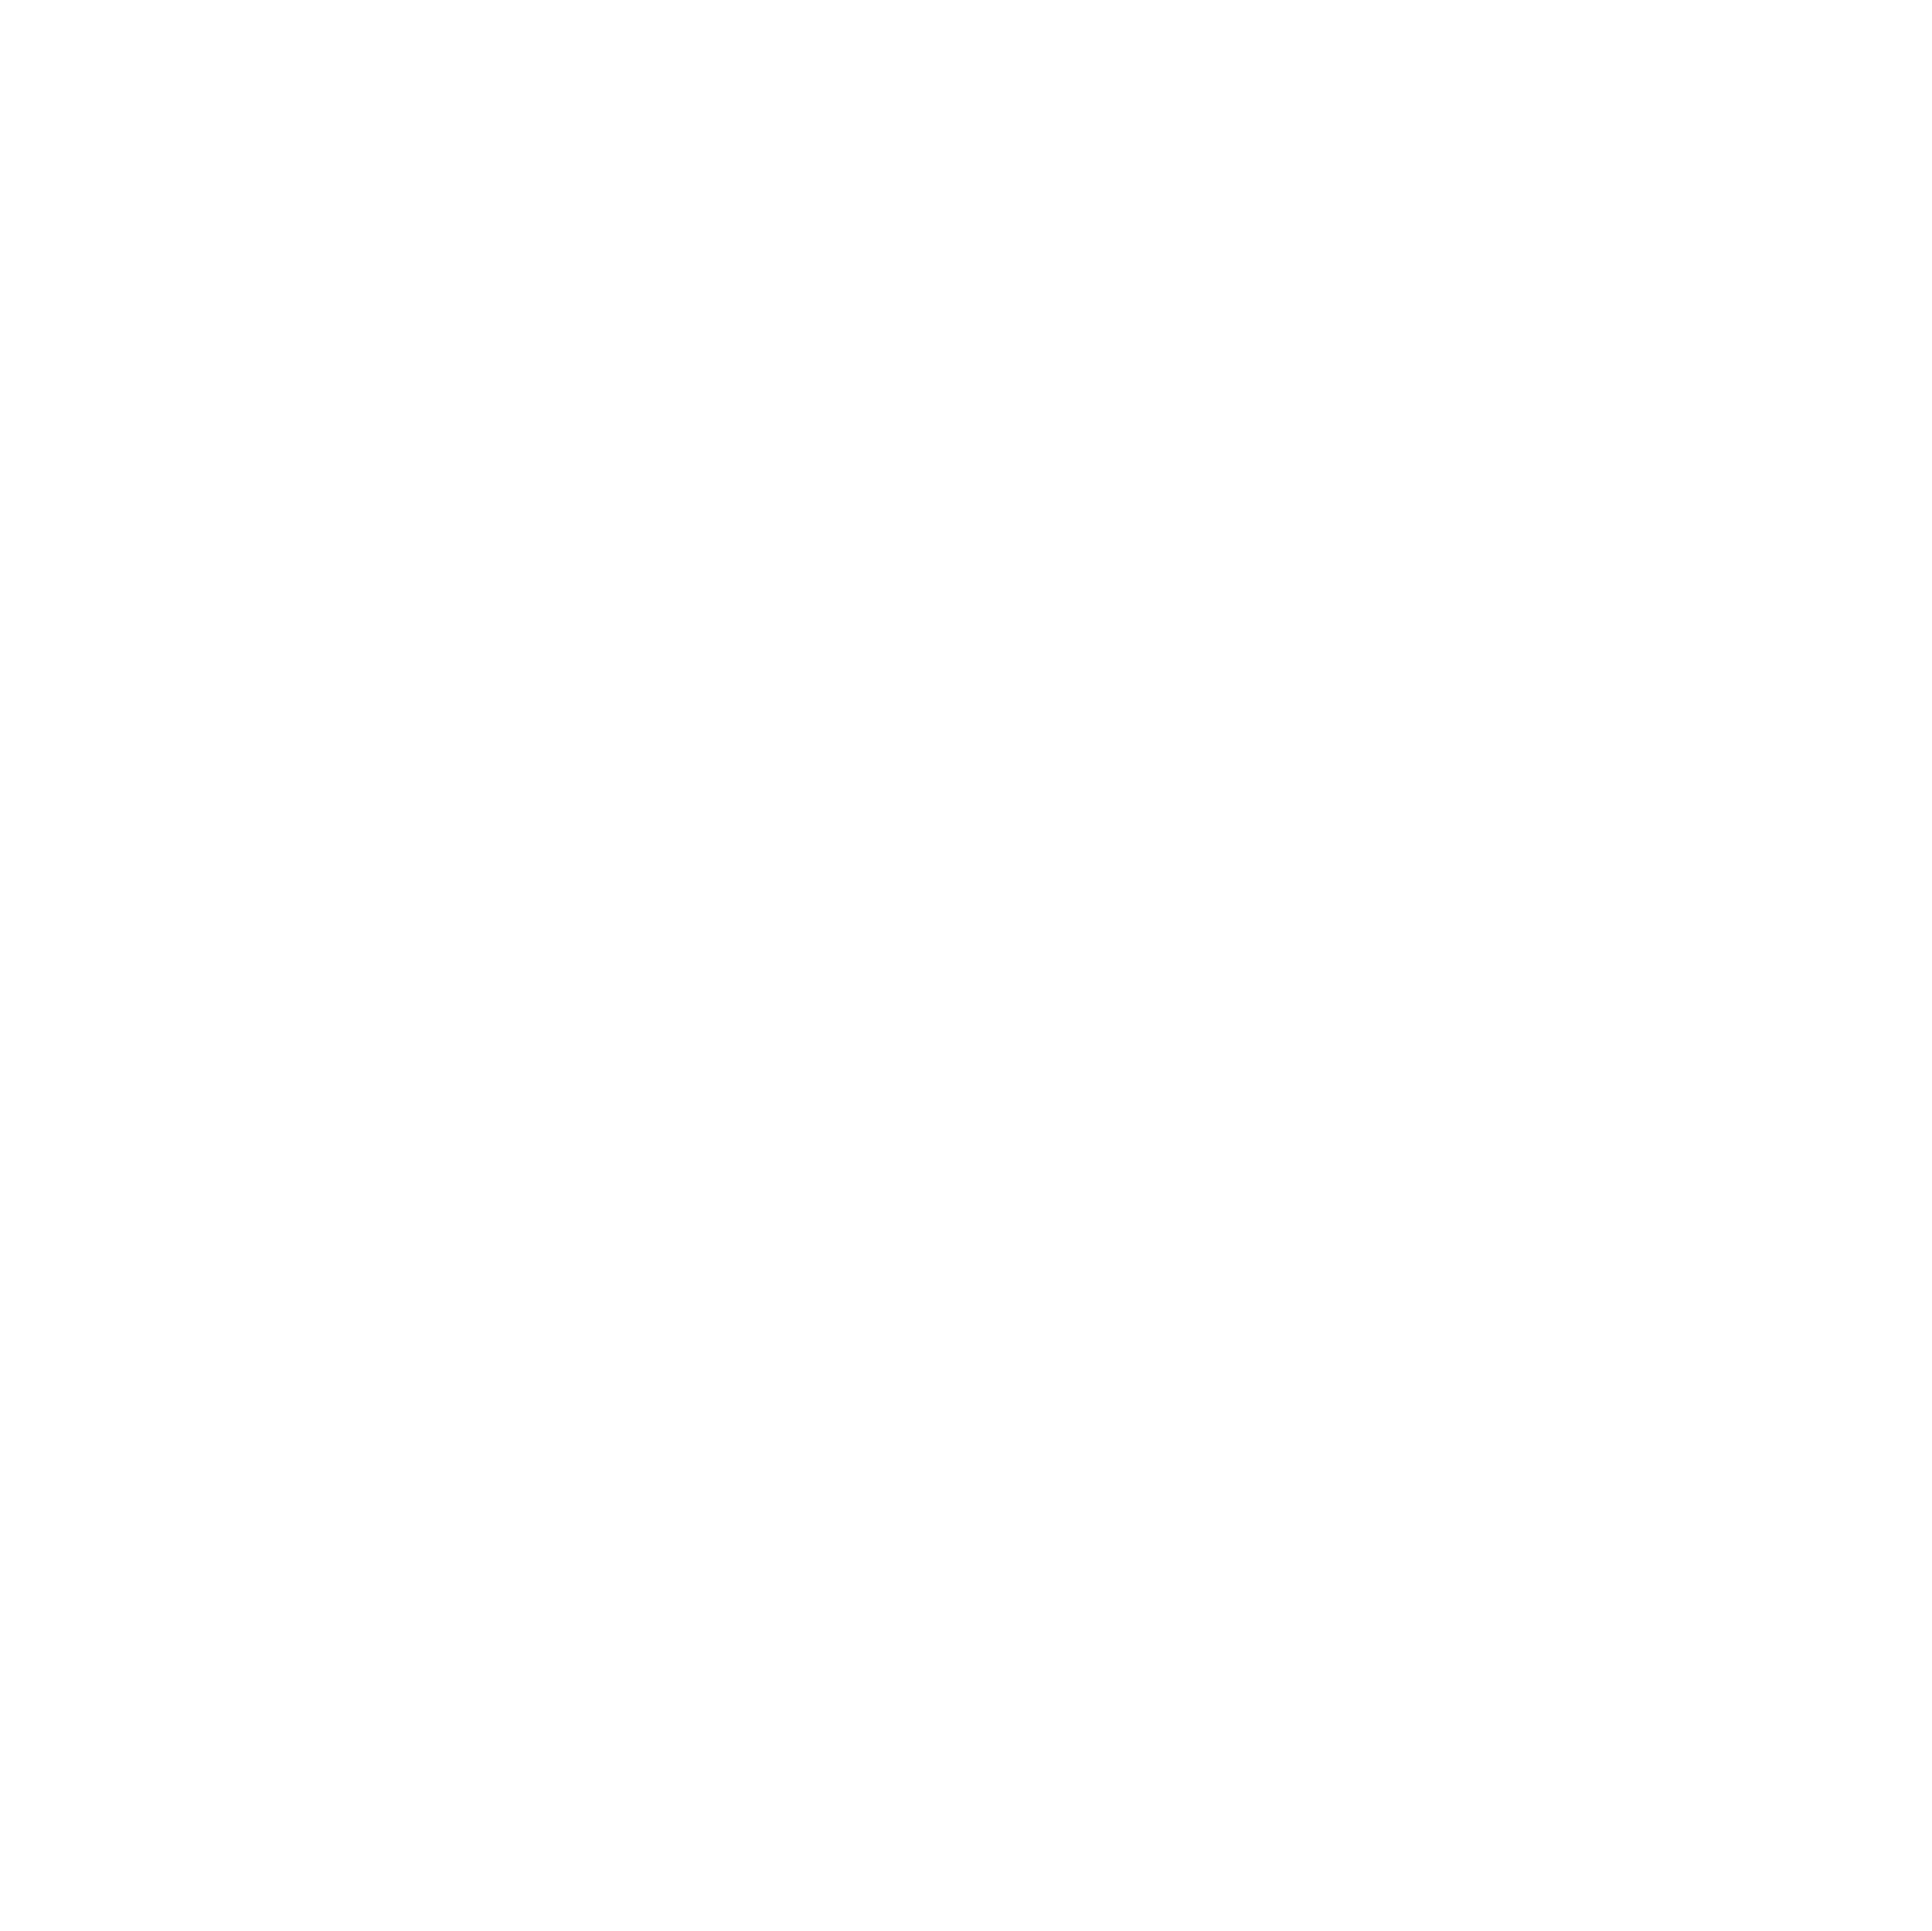 Approved member of Greentech Alliance